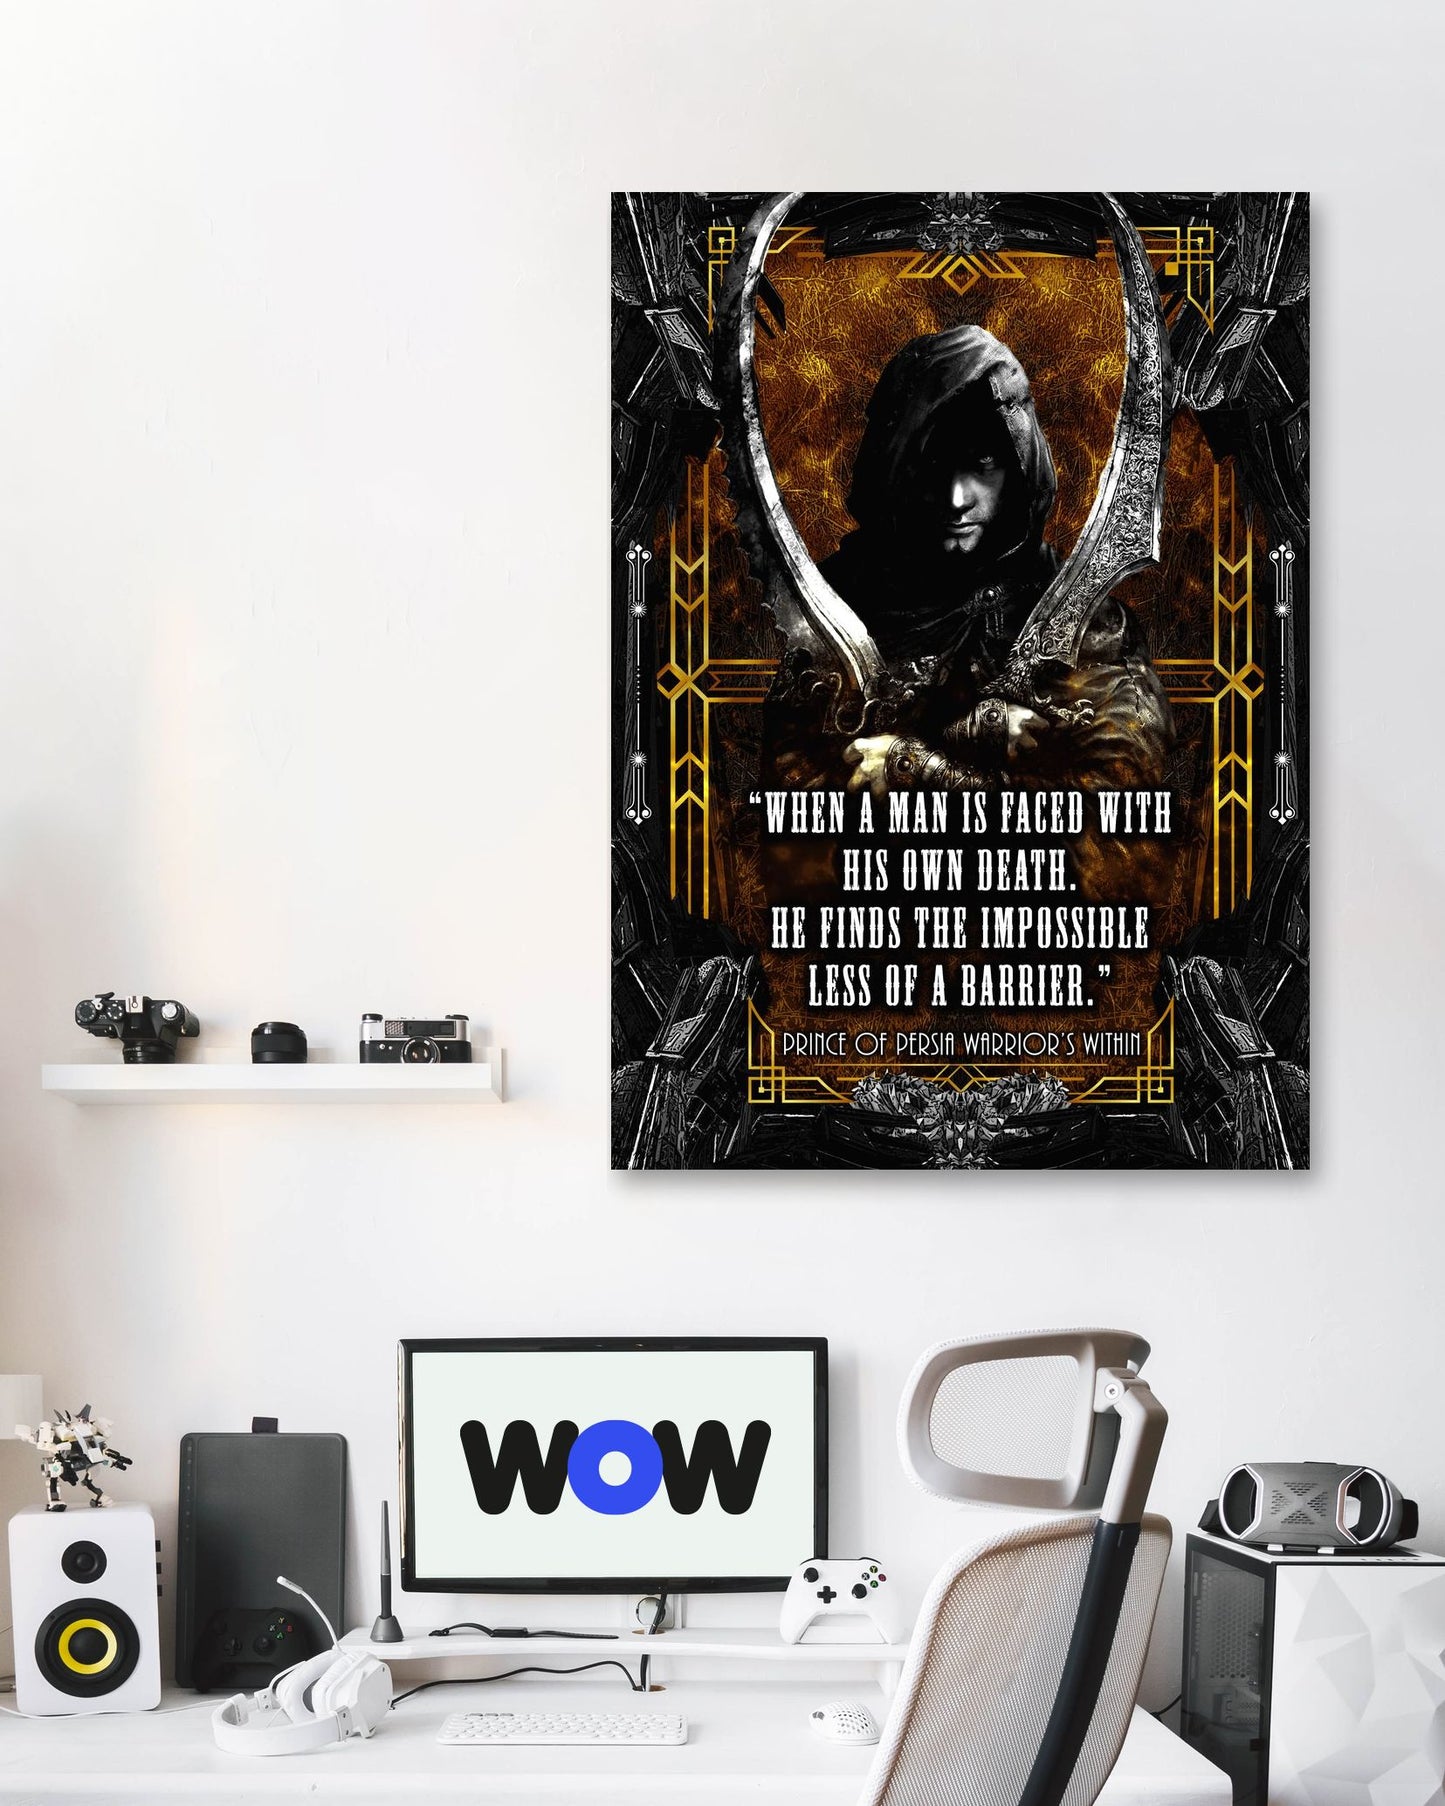 Prince of Persia the warrior's within death quote - @SyanArt